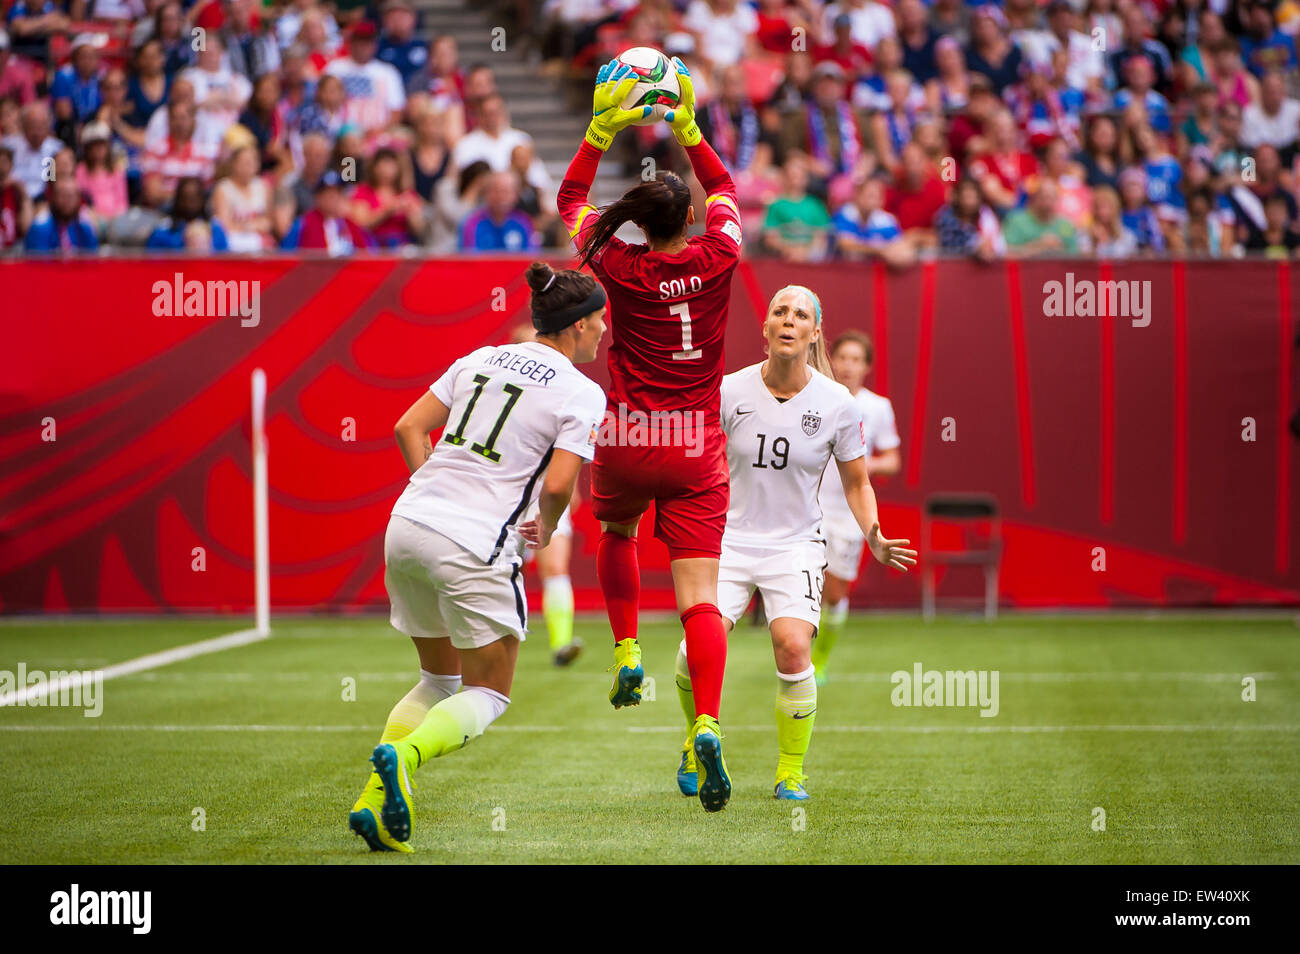 Vancouver, Canada. 16th June, 2015. United States goalkeeper Hope Solo (#1) leaps to make a save during the opening round match between Nigeria and the United States at the FIFA Women's World Cup Canada 2015 at BC Place Stadium. The United States won the match 1-0. Credit:  Matt Jacques/Alamy Live News Stock Photo